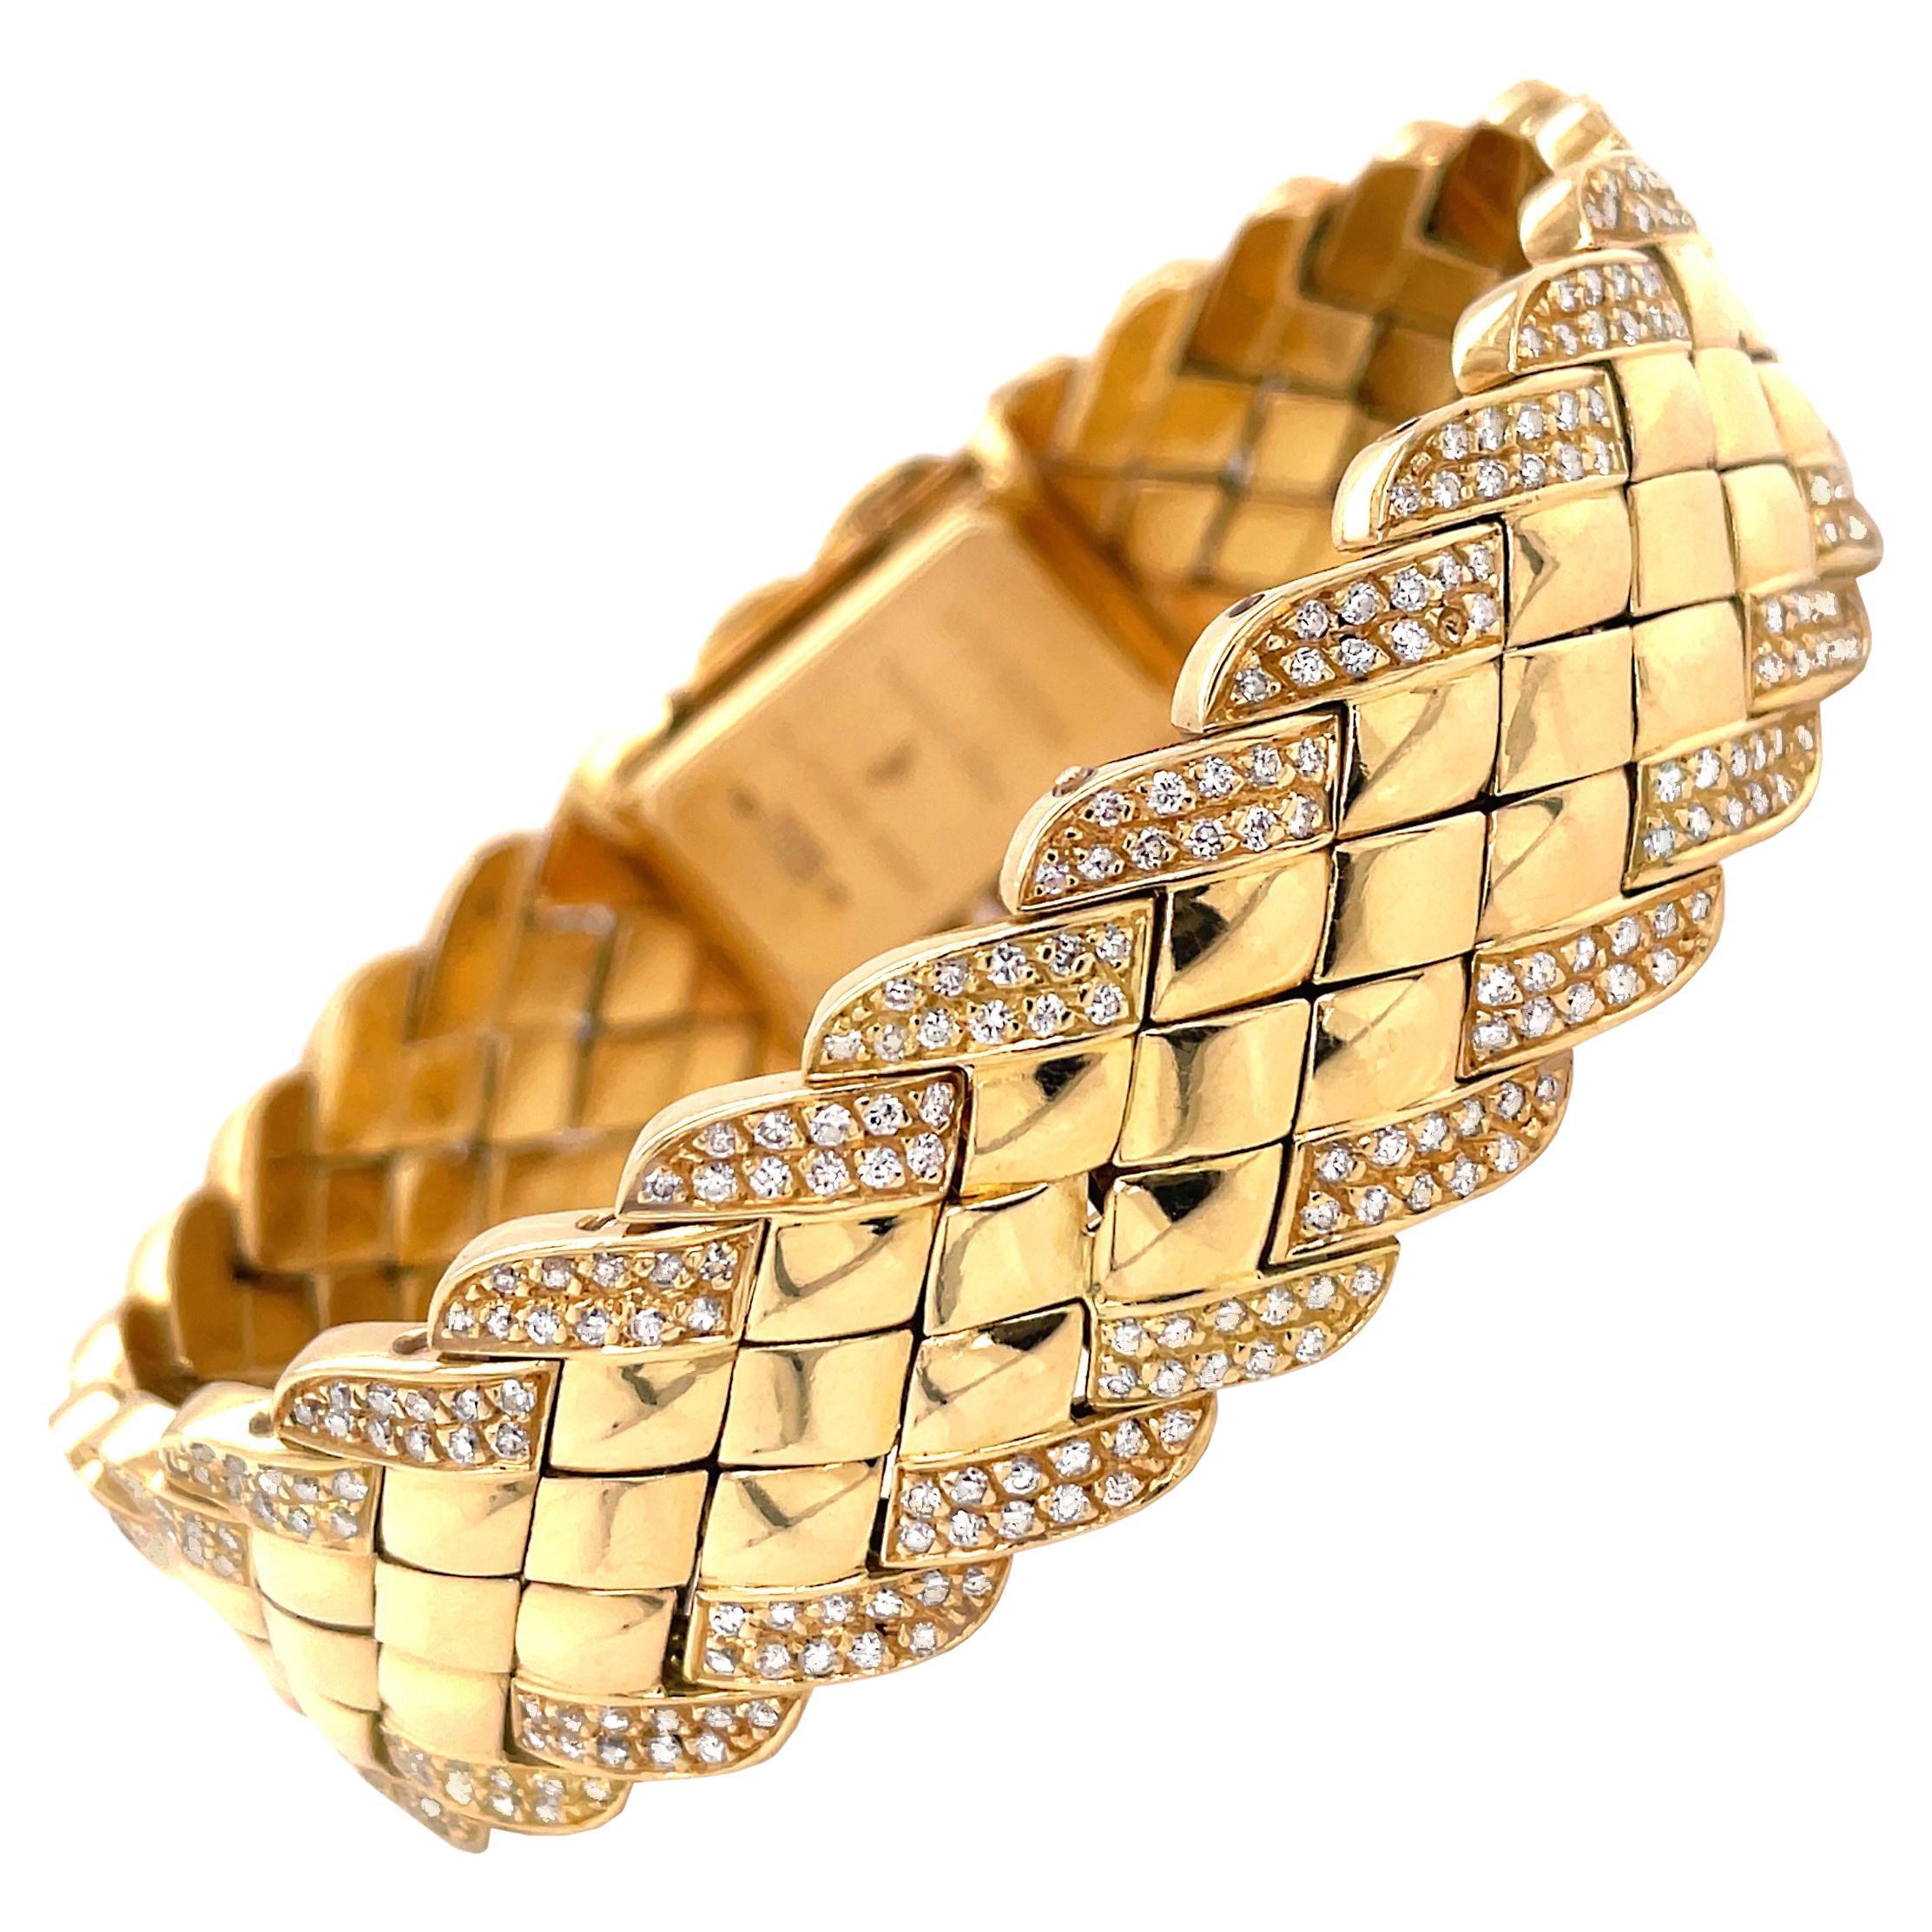 This gorgeous bracelet watch made by French jewellery designer, Alexis Barthelay is made in 18 carat yellow gold. The bracelet is beautifully crafted with diamond shaped metal panels, finished with a diamond set boarder inlaid with approximately